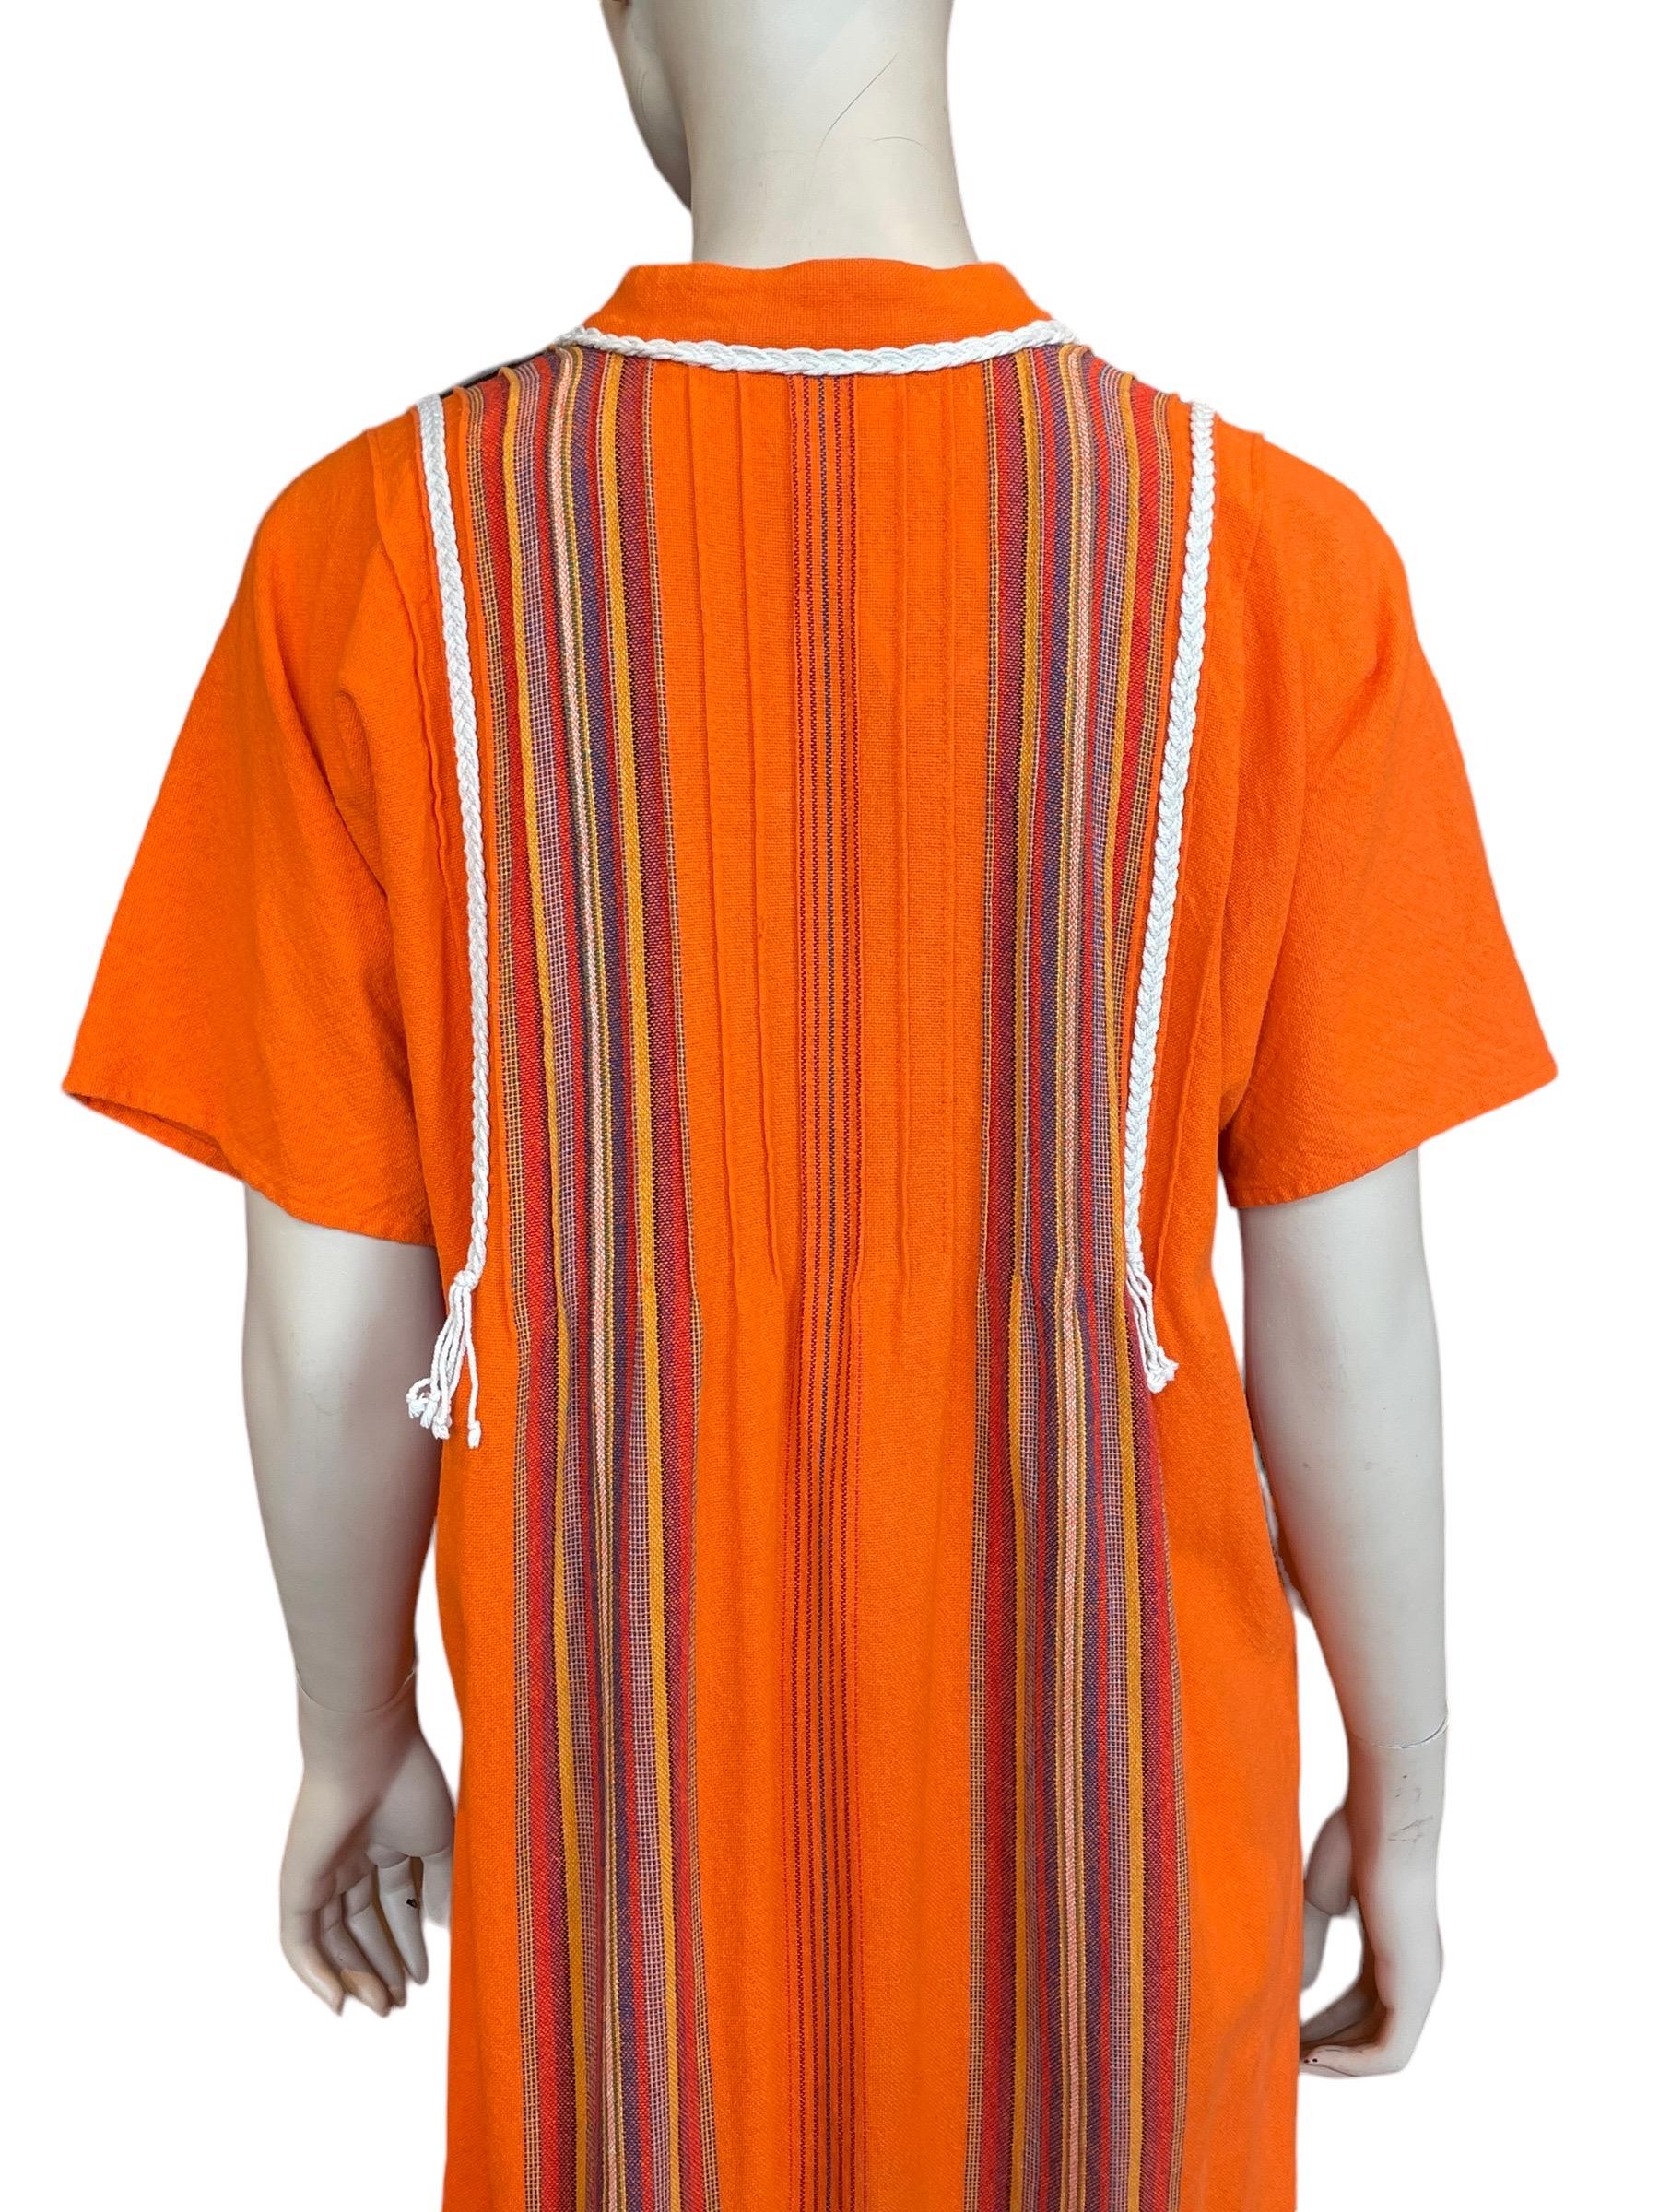 Y2K Tory Burch Orange Caftan  In Good Condition For Sale In Greenport, NY